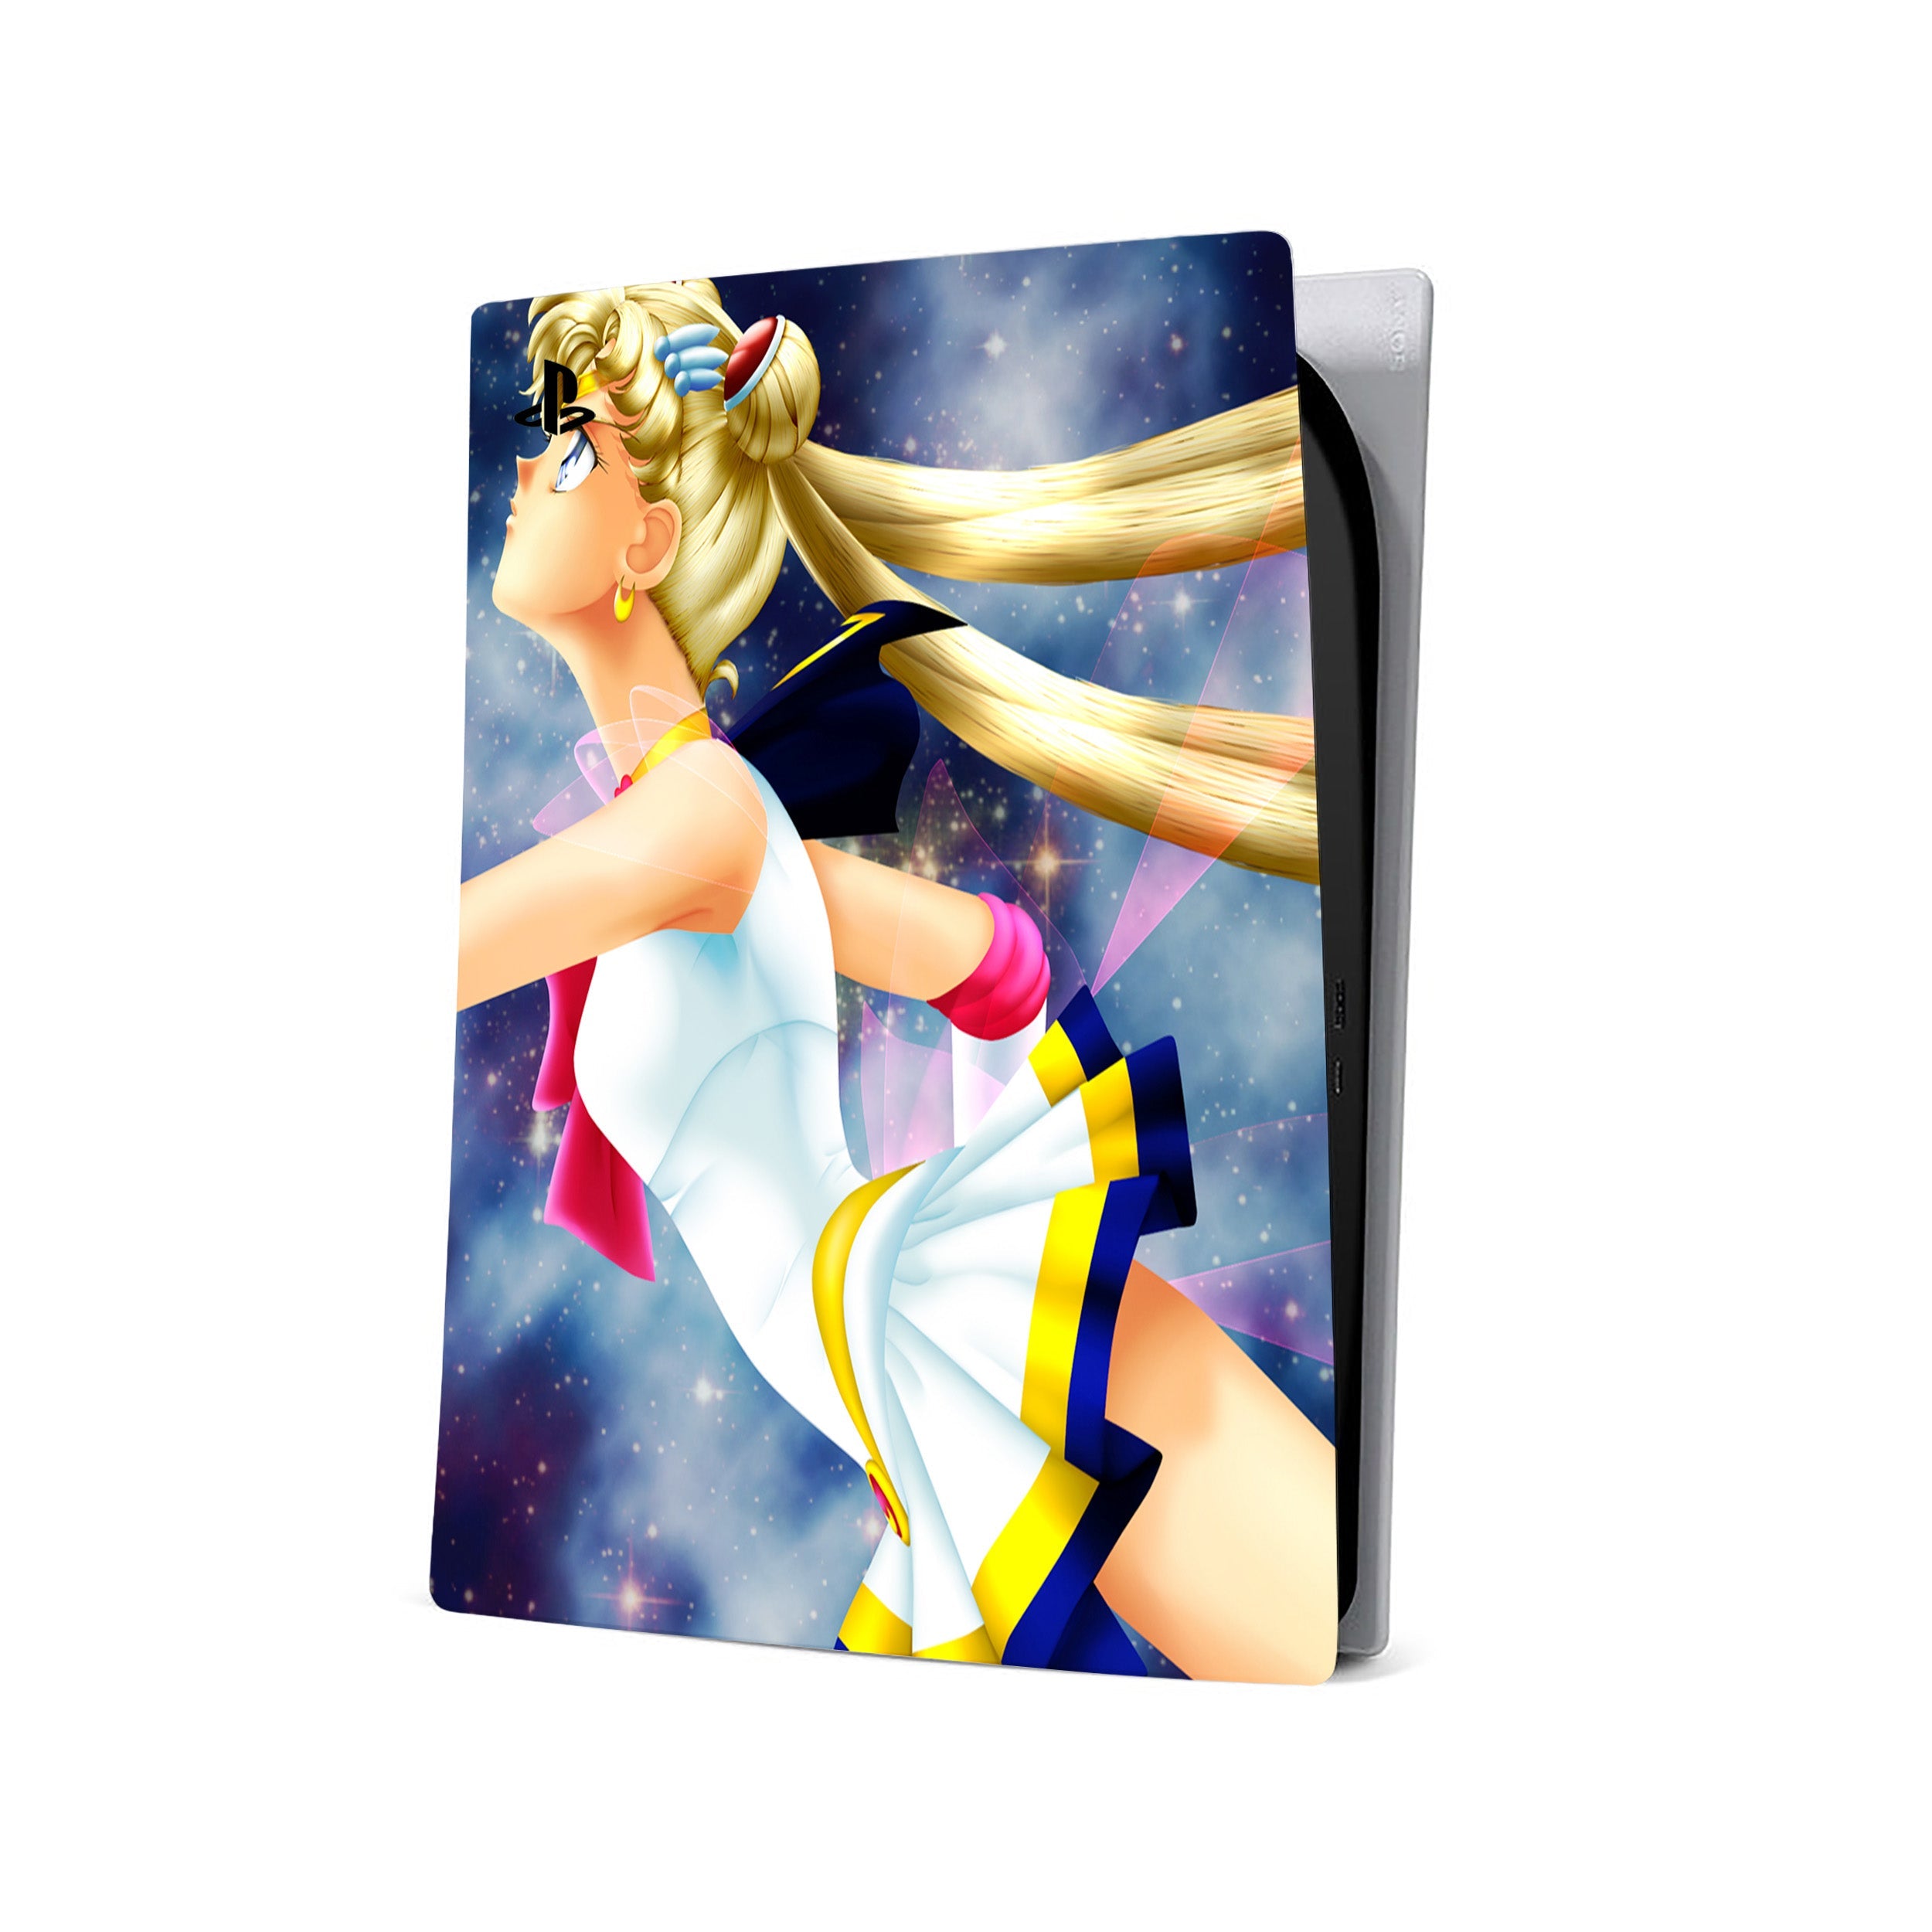 A video game skin featuring a Sailor Moon design for the PS5.